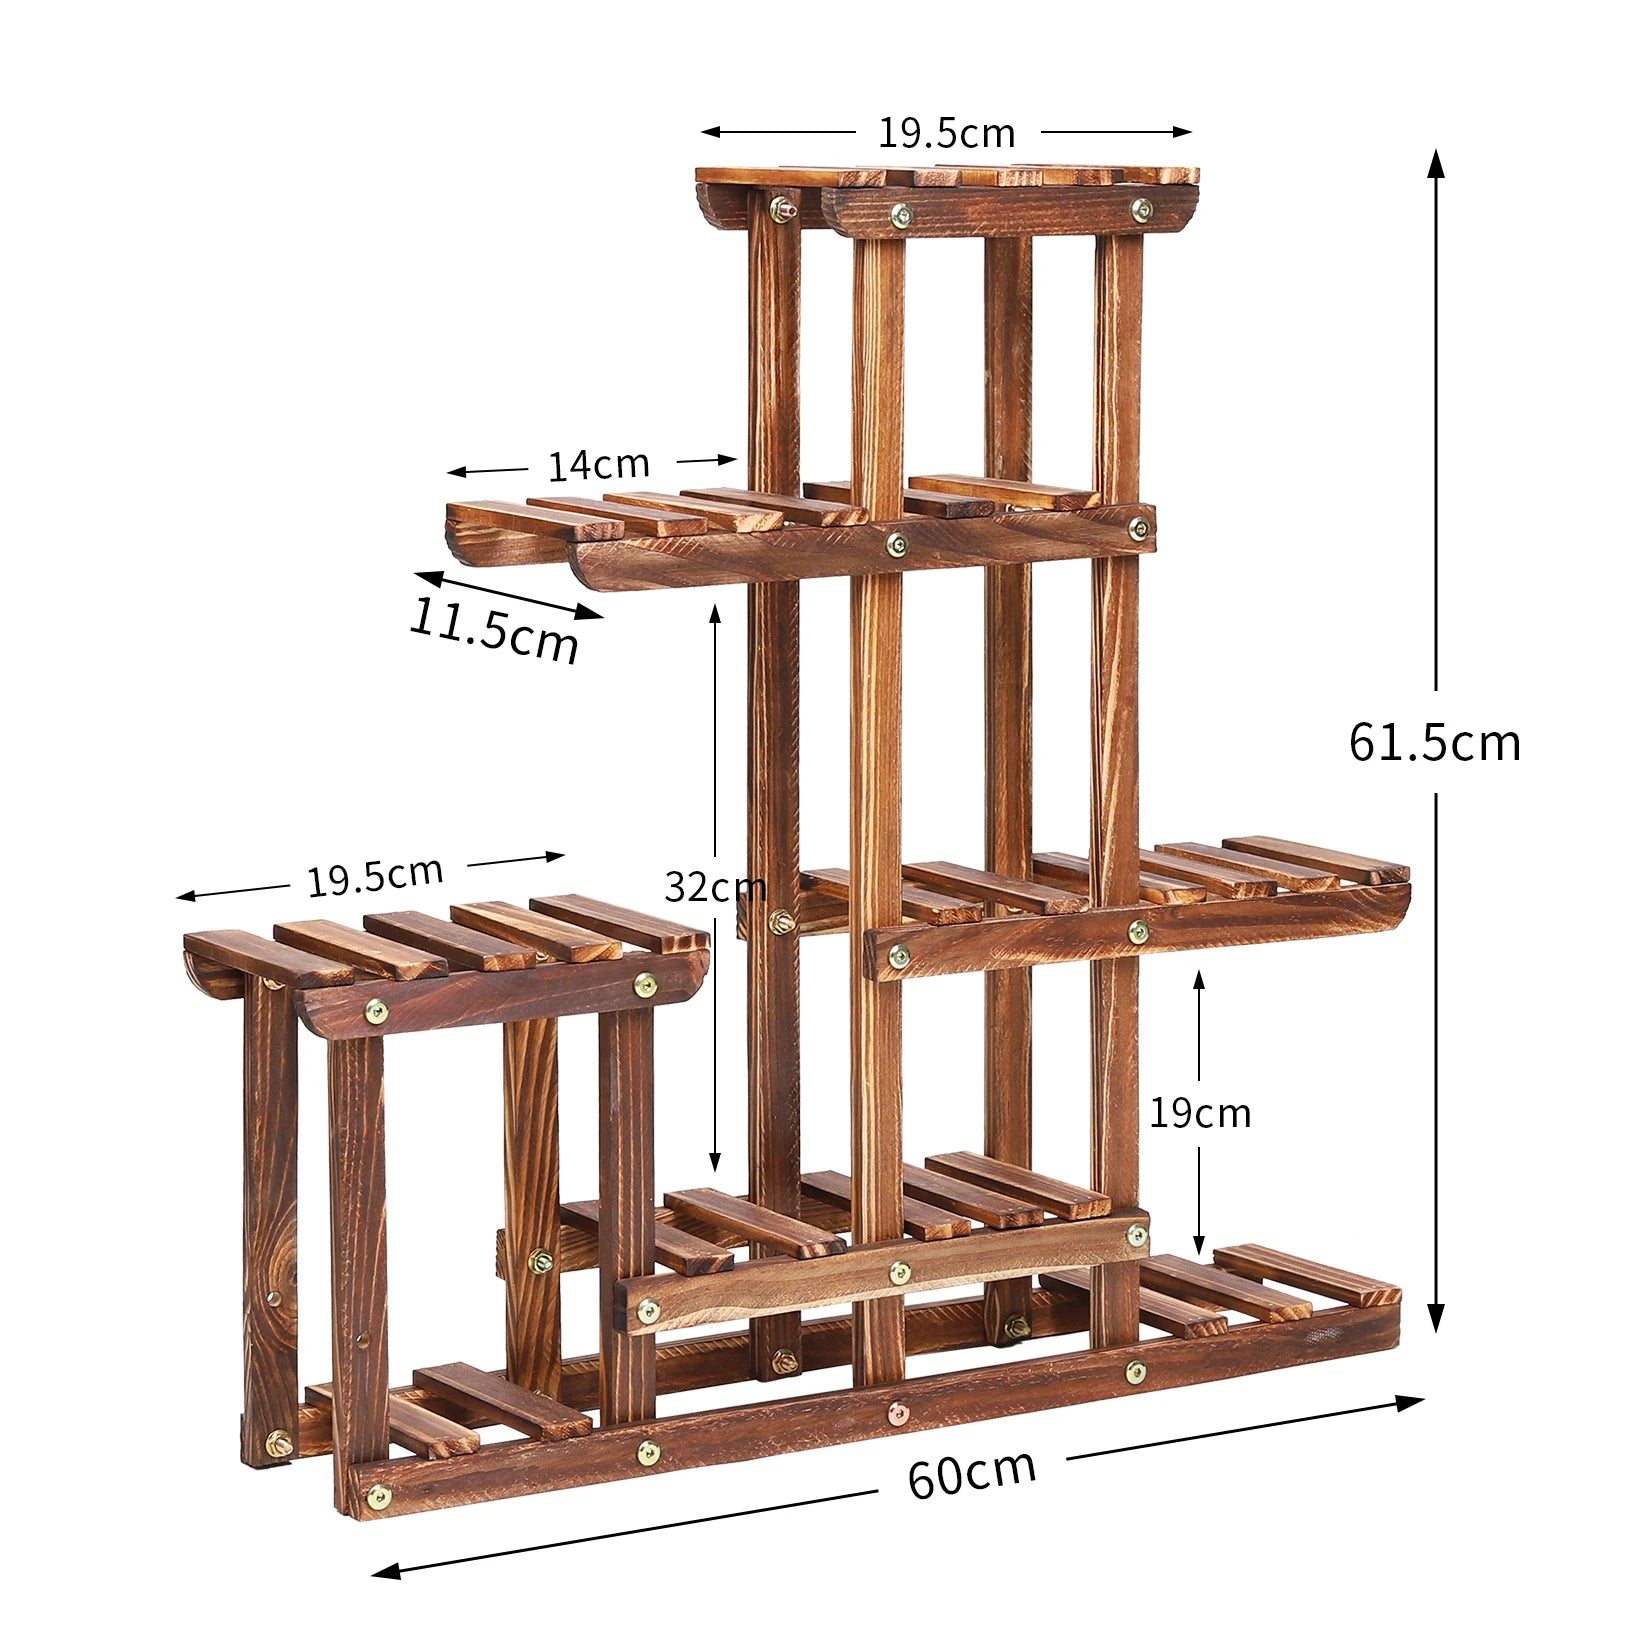 Multi-tiered rack designed Plant stand Julian - Wood Plant Stands - KonnaLiving